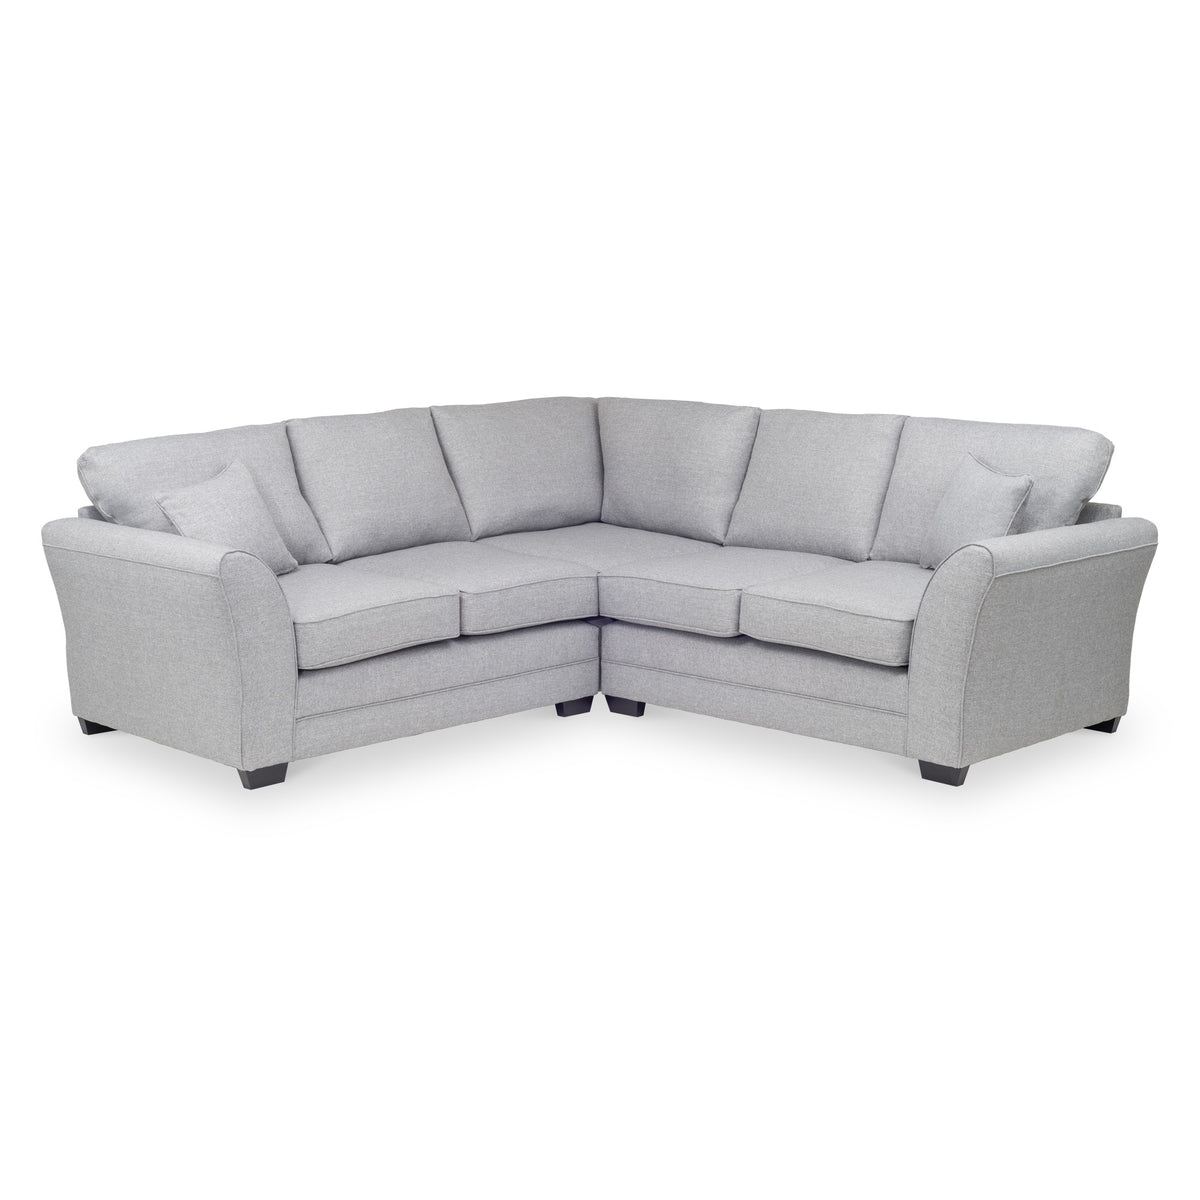 St Ives Large Corner Sofa in Silver by Roseland Furniture